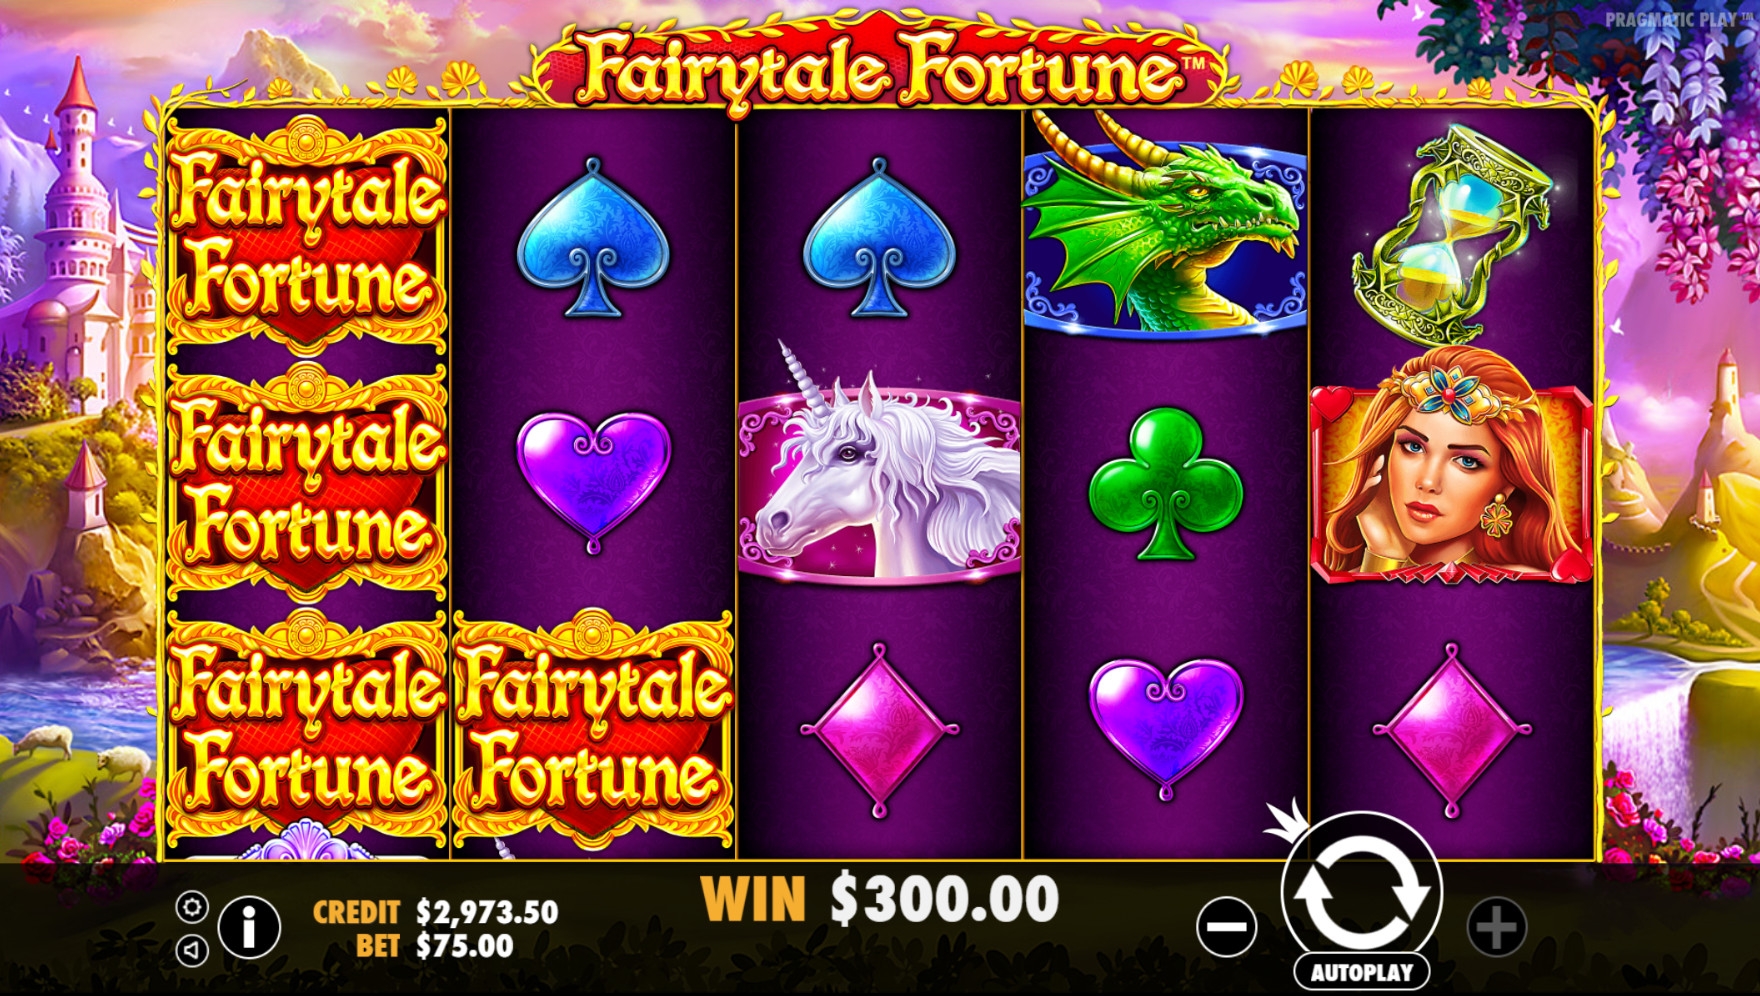 Fairytale Fortune (Fairytale Fortune) from category Slots